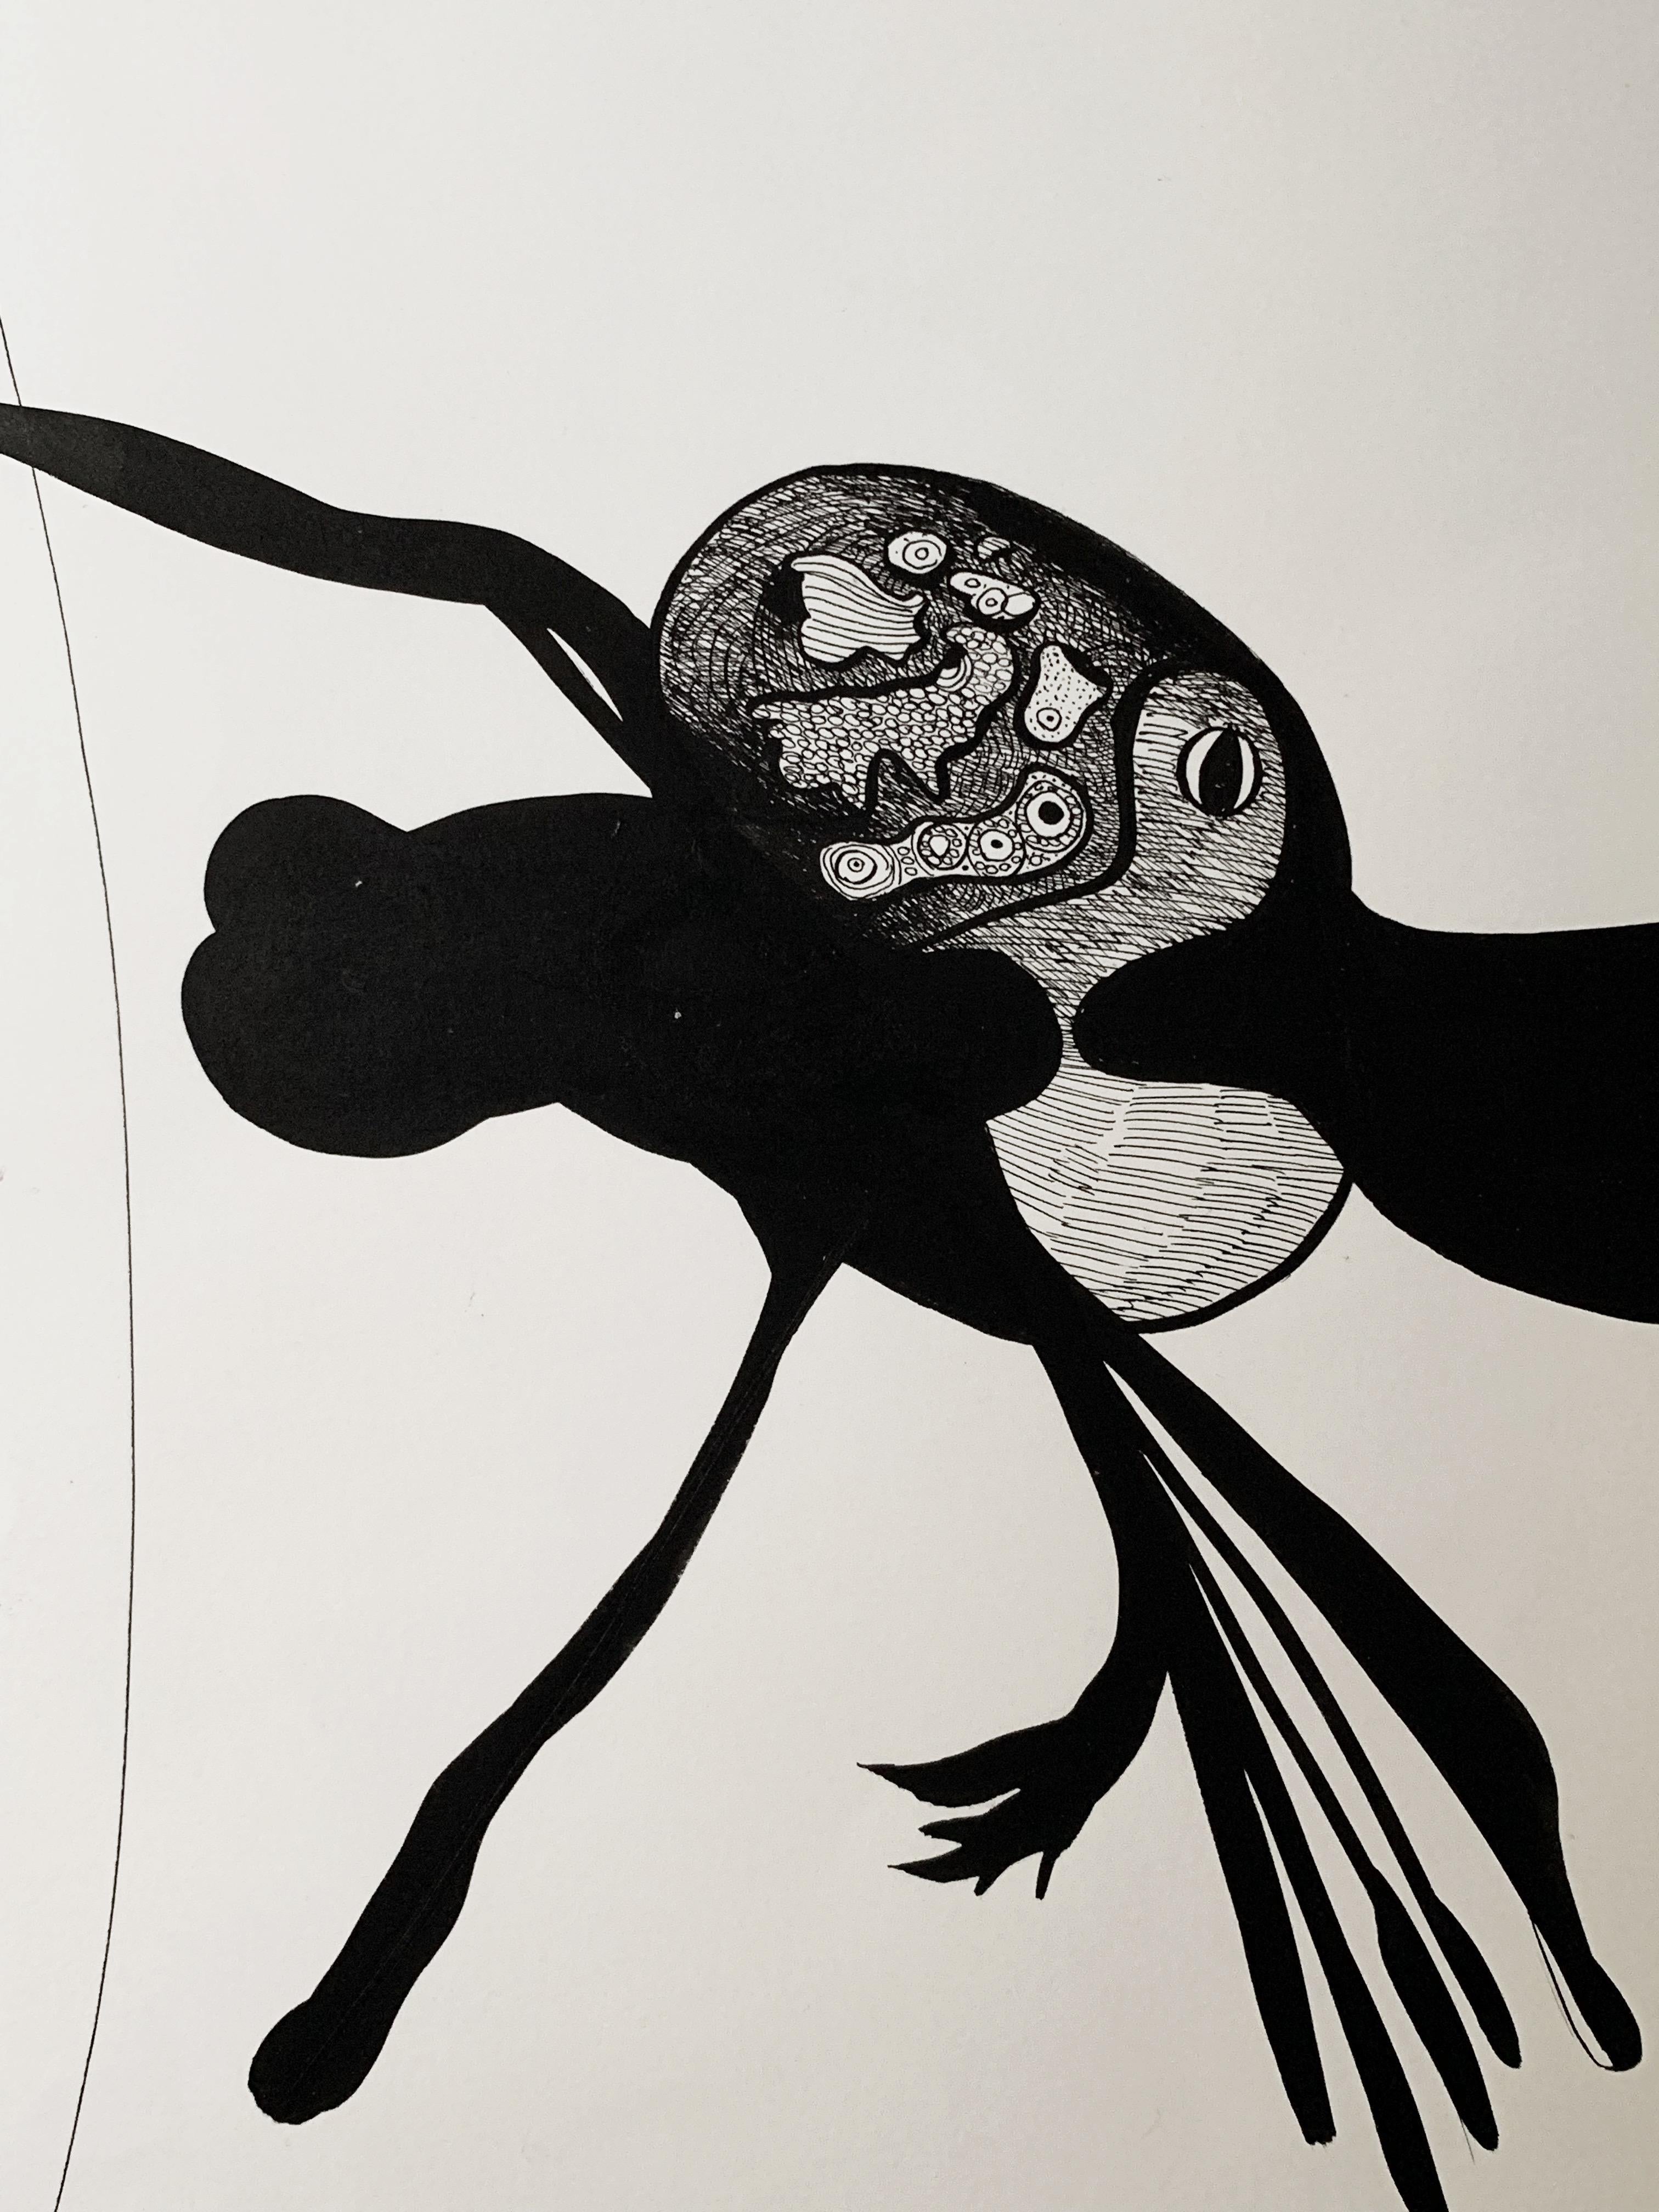 Alena NADVORNIKOVA (née en 1942)
Zoomorphic composition, 1979
India ink on paper
Signed and dated 